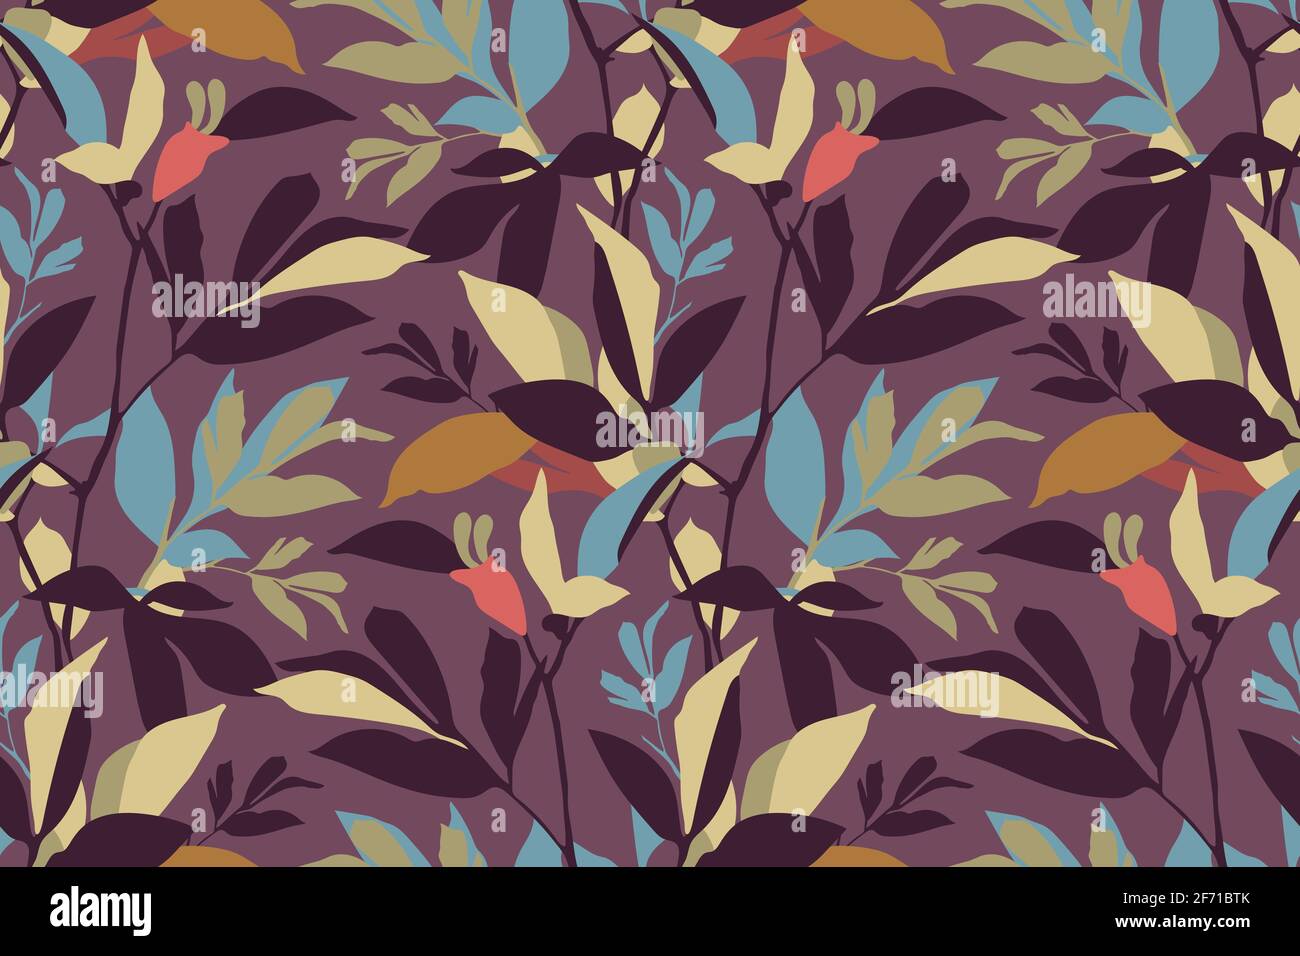 Vector floral seamless pattern. Colorful branches and leaves isolated on a purple background. For fabric, interior textile, wallpaper, wrapping paper. Stock Photo